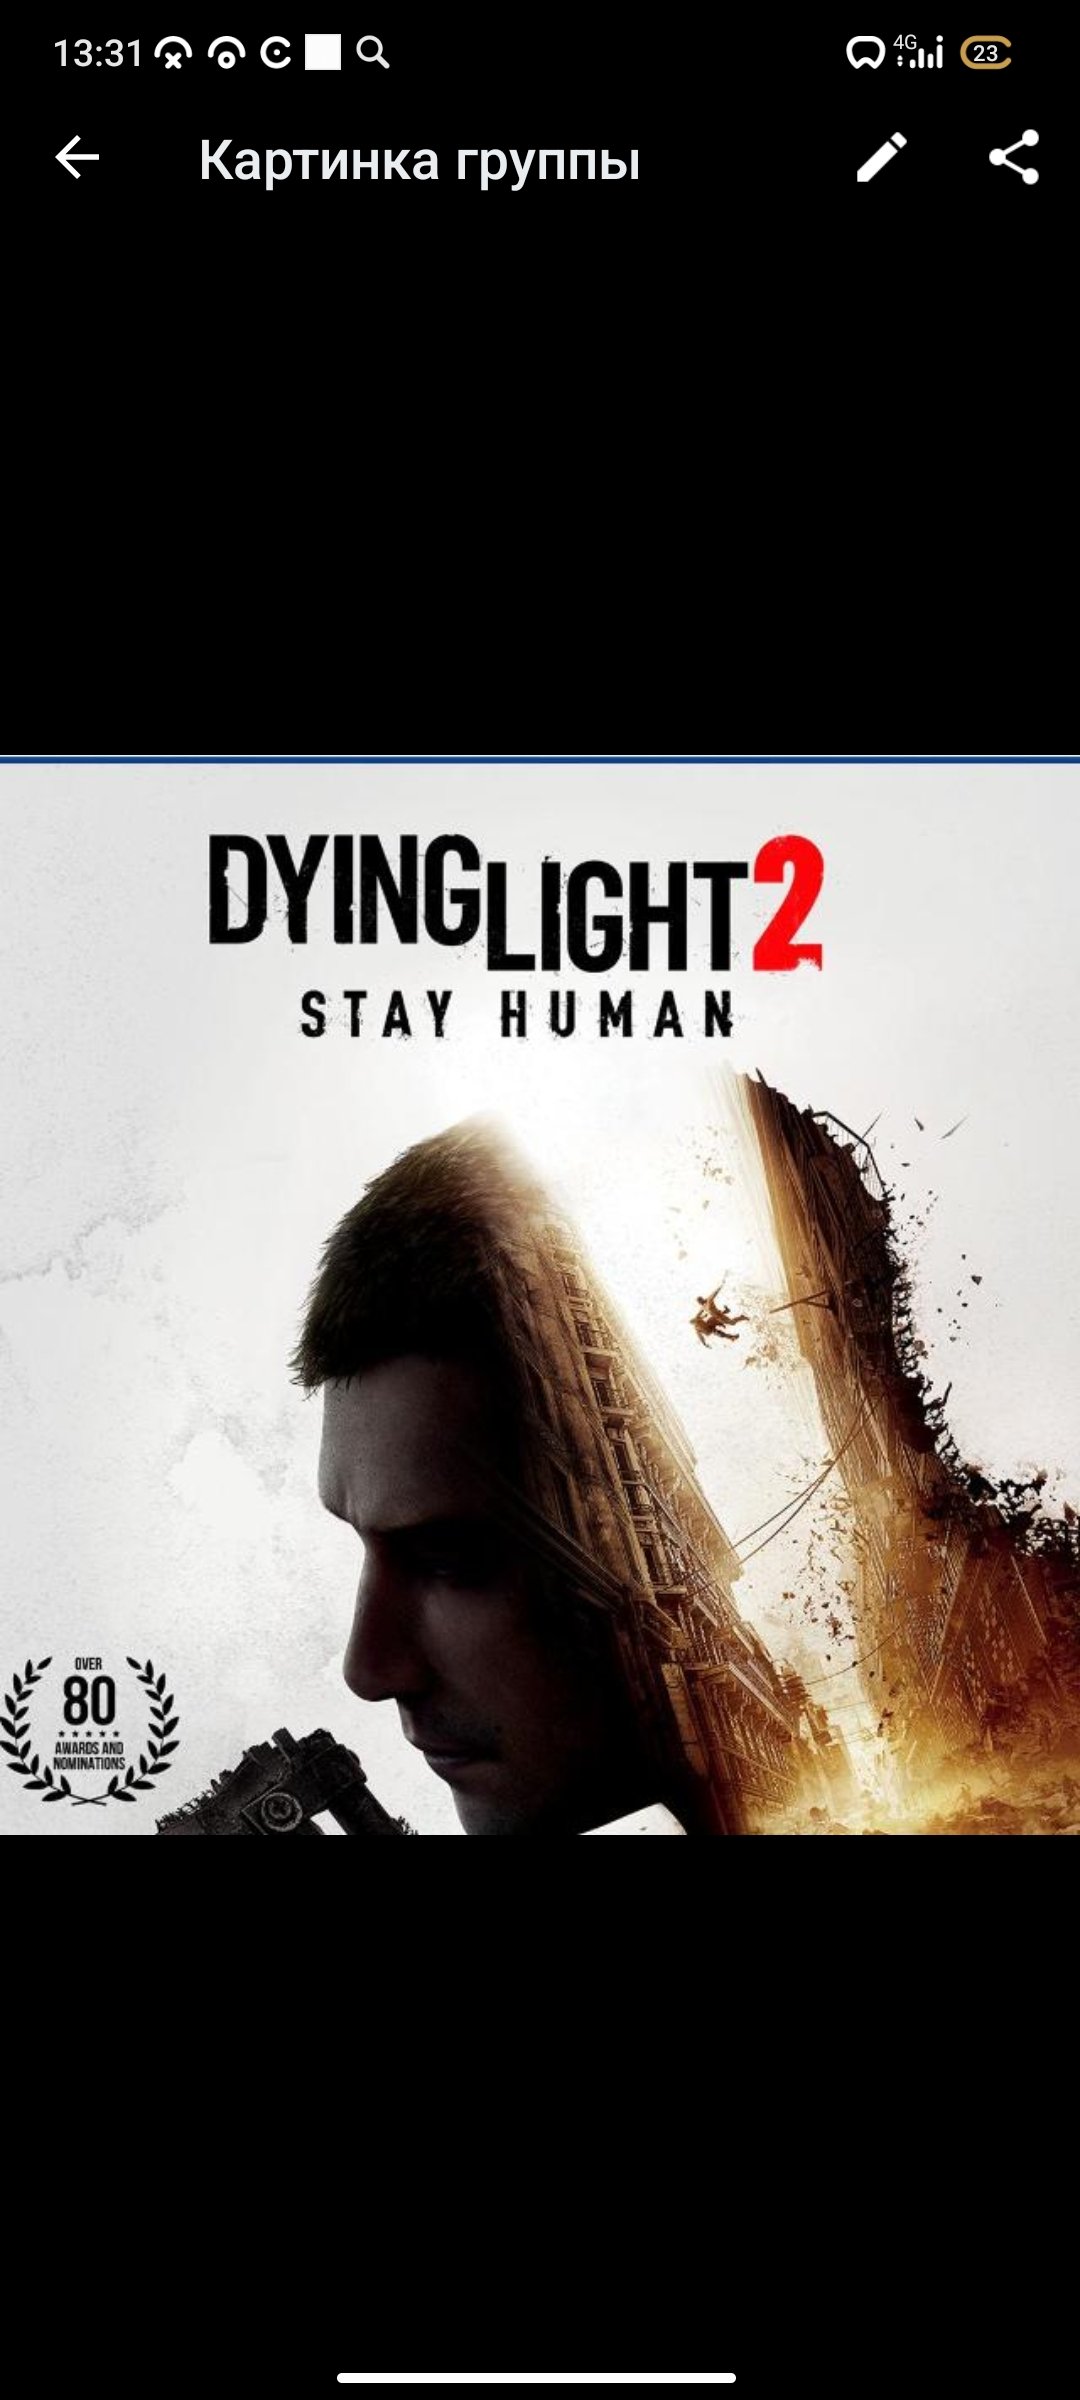 Dying light 2:Stay human